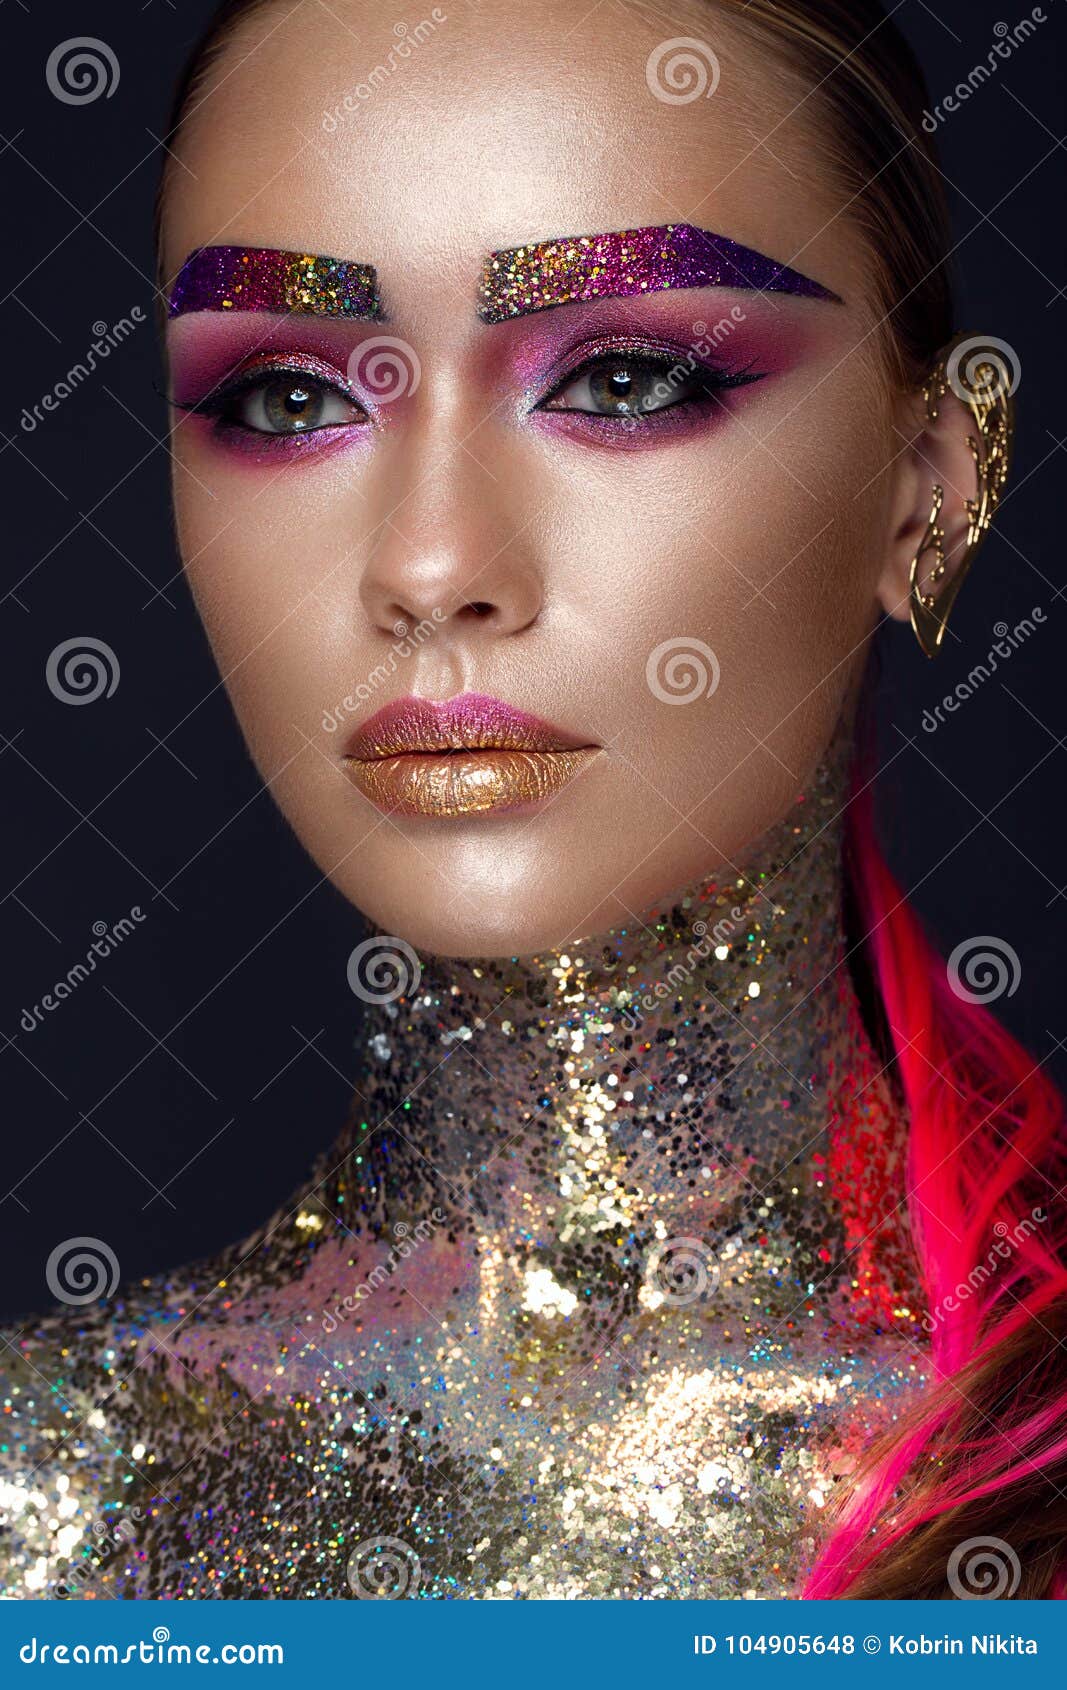 Glitter Strobing Takes Over As A Magnificent Holiday Makeup Look